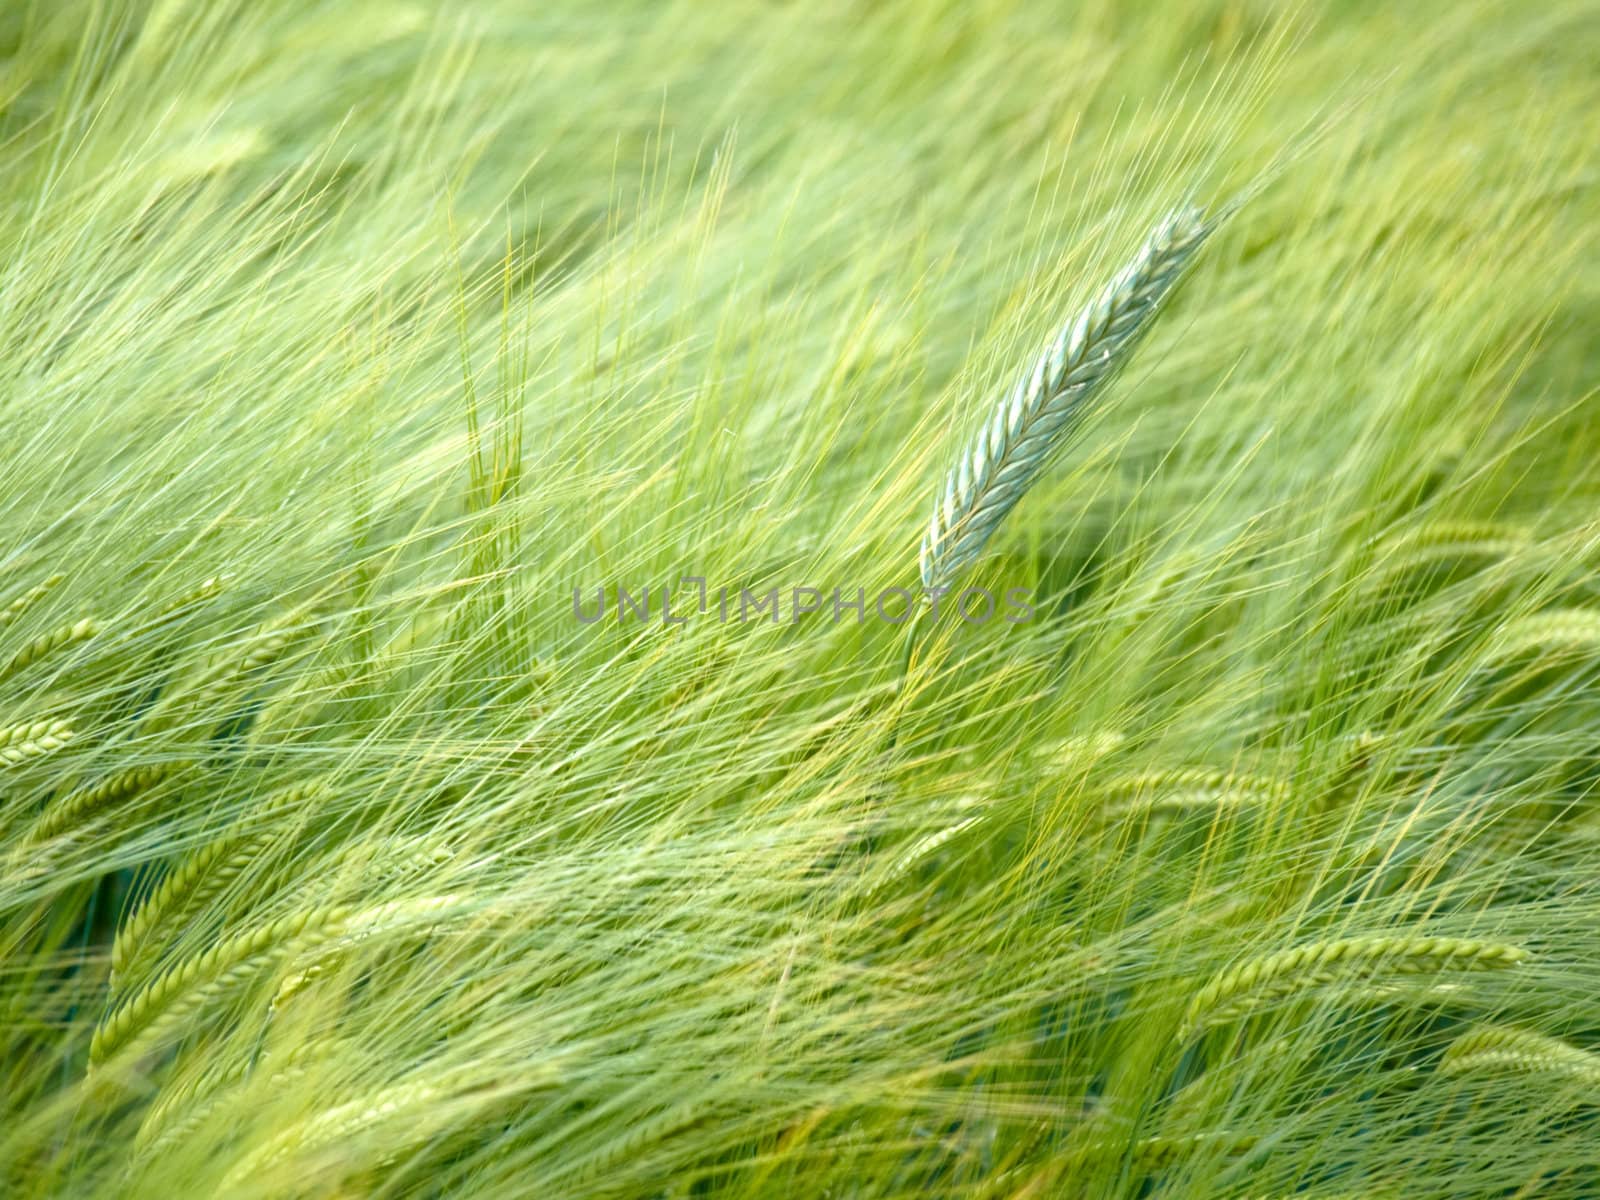 Close up shot of a green wheat field at spring 